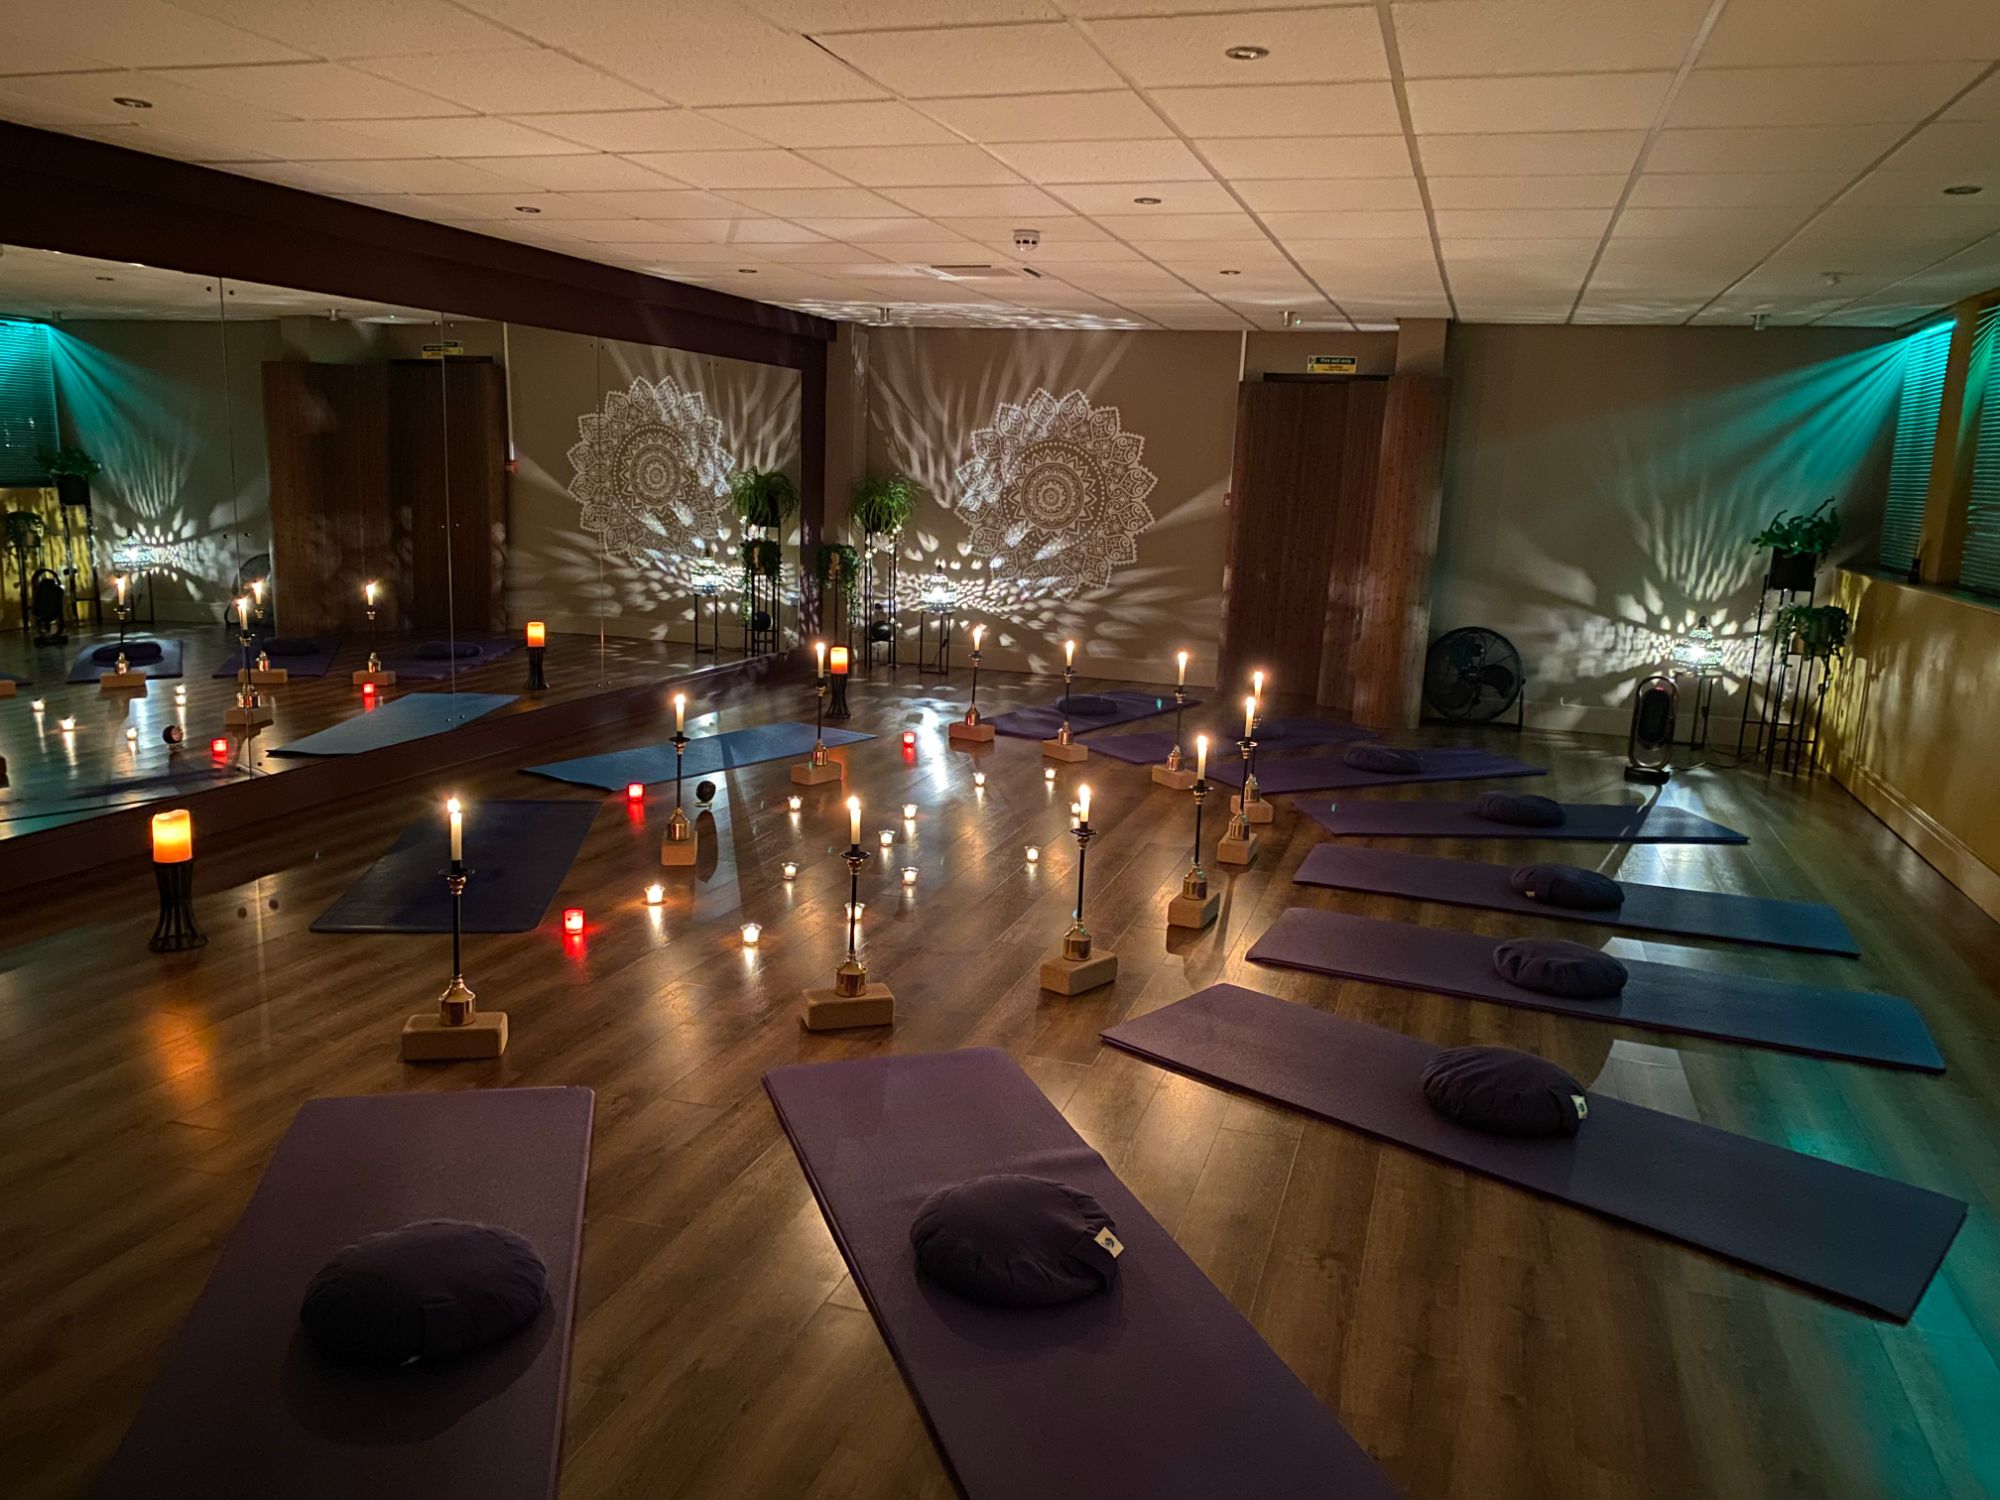 Candle light at Power of Yoga Studio, Greenhill Sheffield